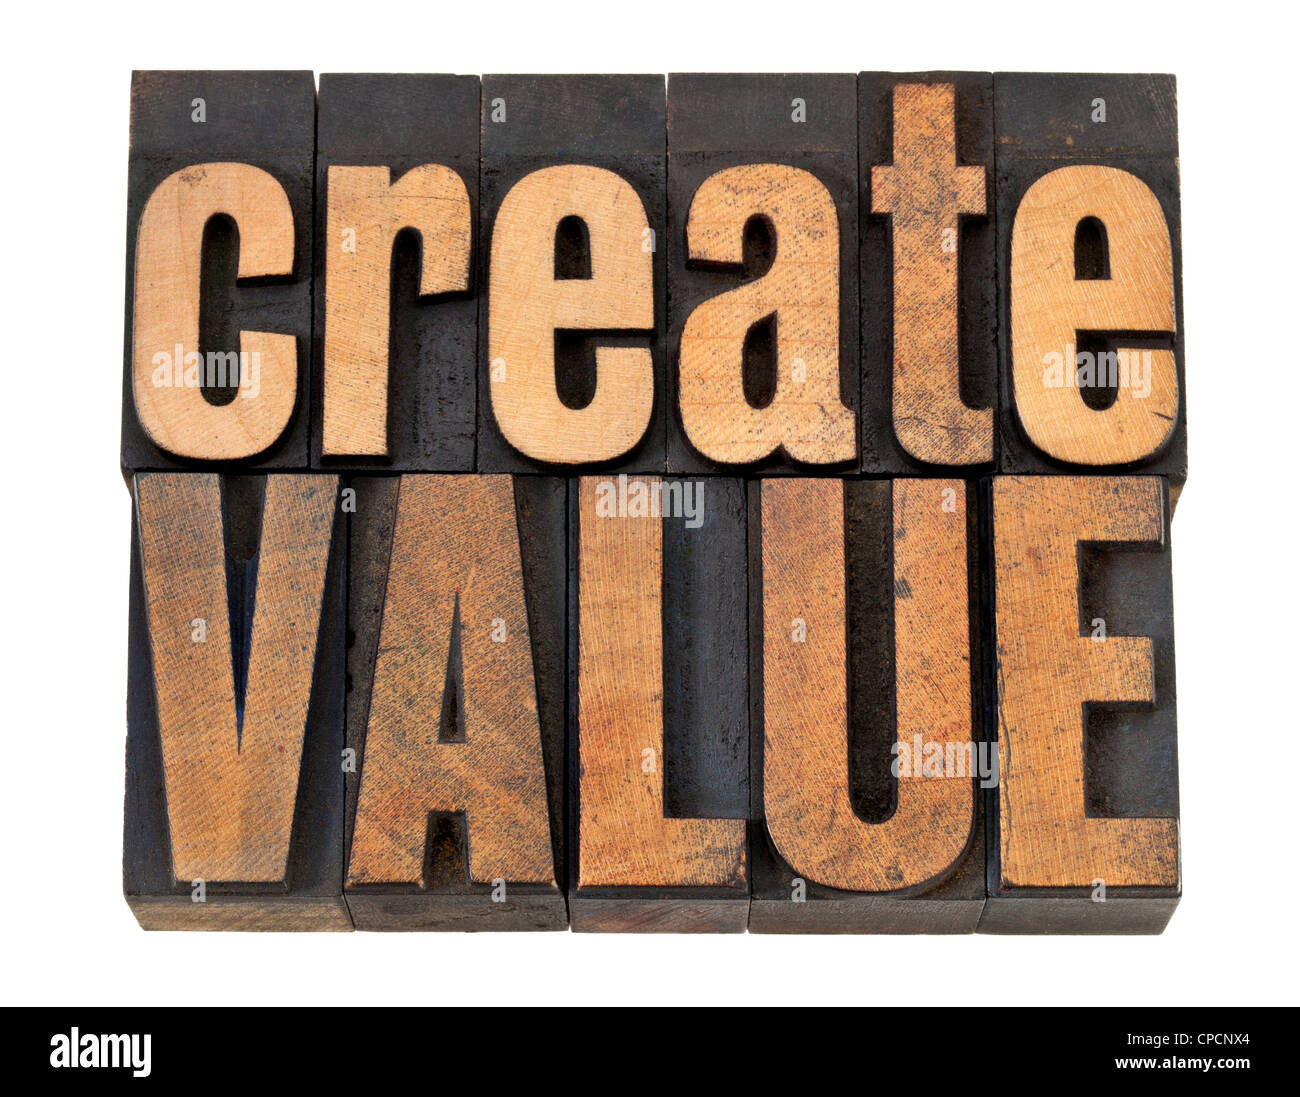 create value - inspiration concept - isolated words in vintage letterpress wood type Stock Photo